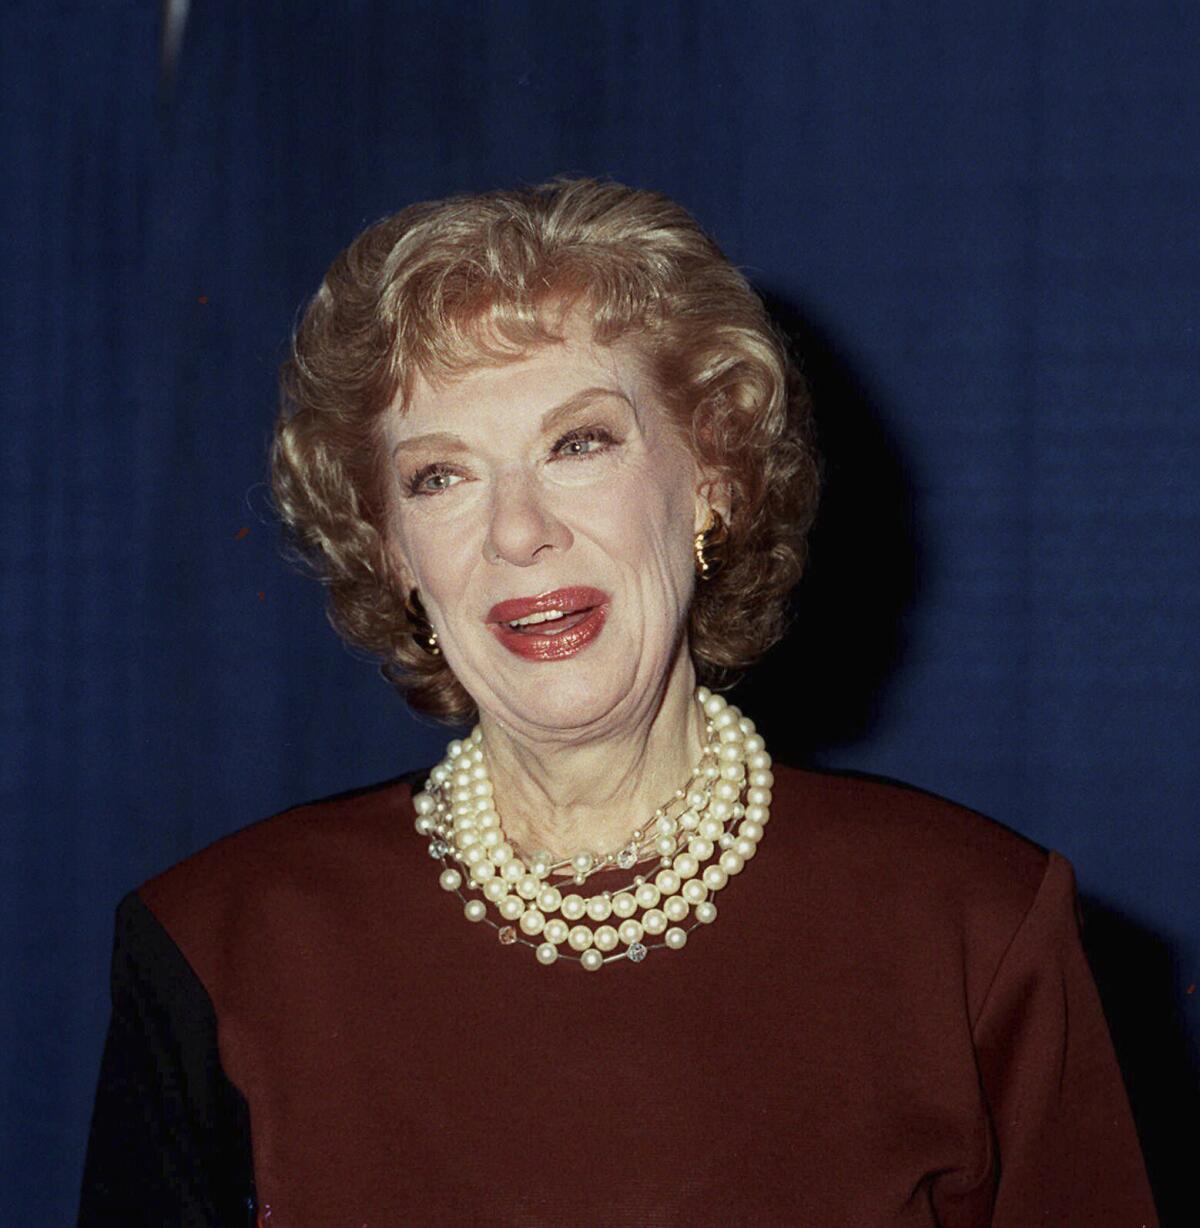 Joyce Randolph wears a burgundy dress with several pearl necklaces as she poses for photos at a red carpet event.